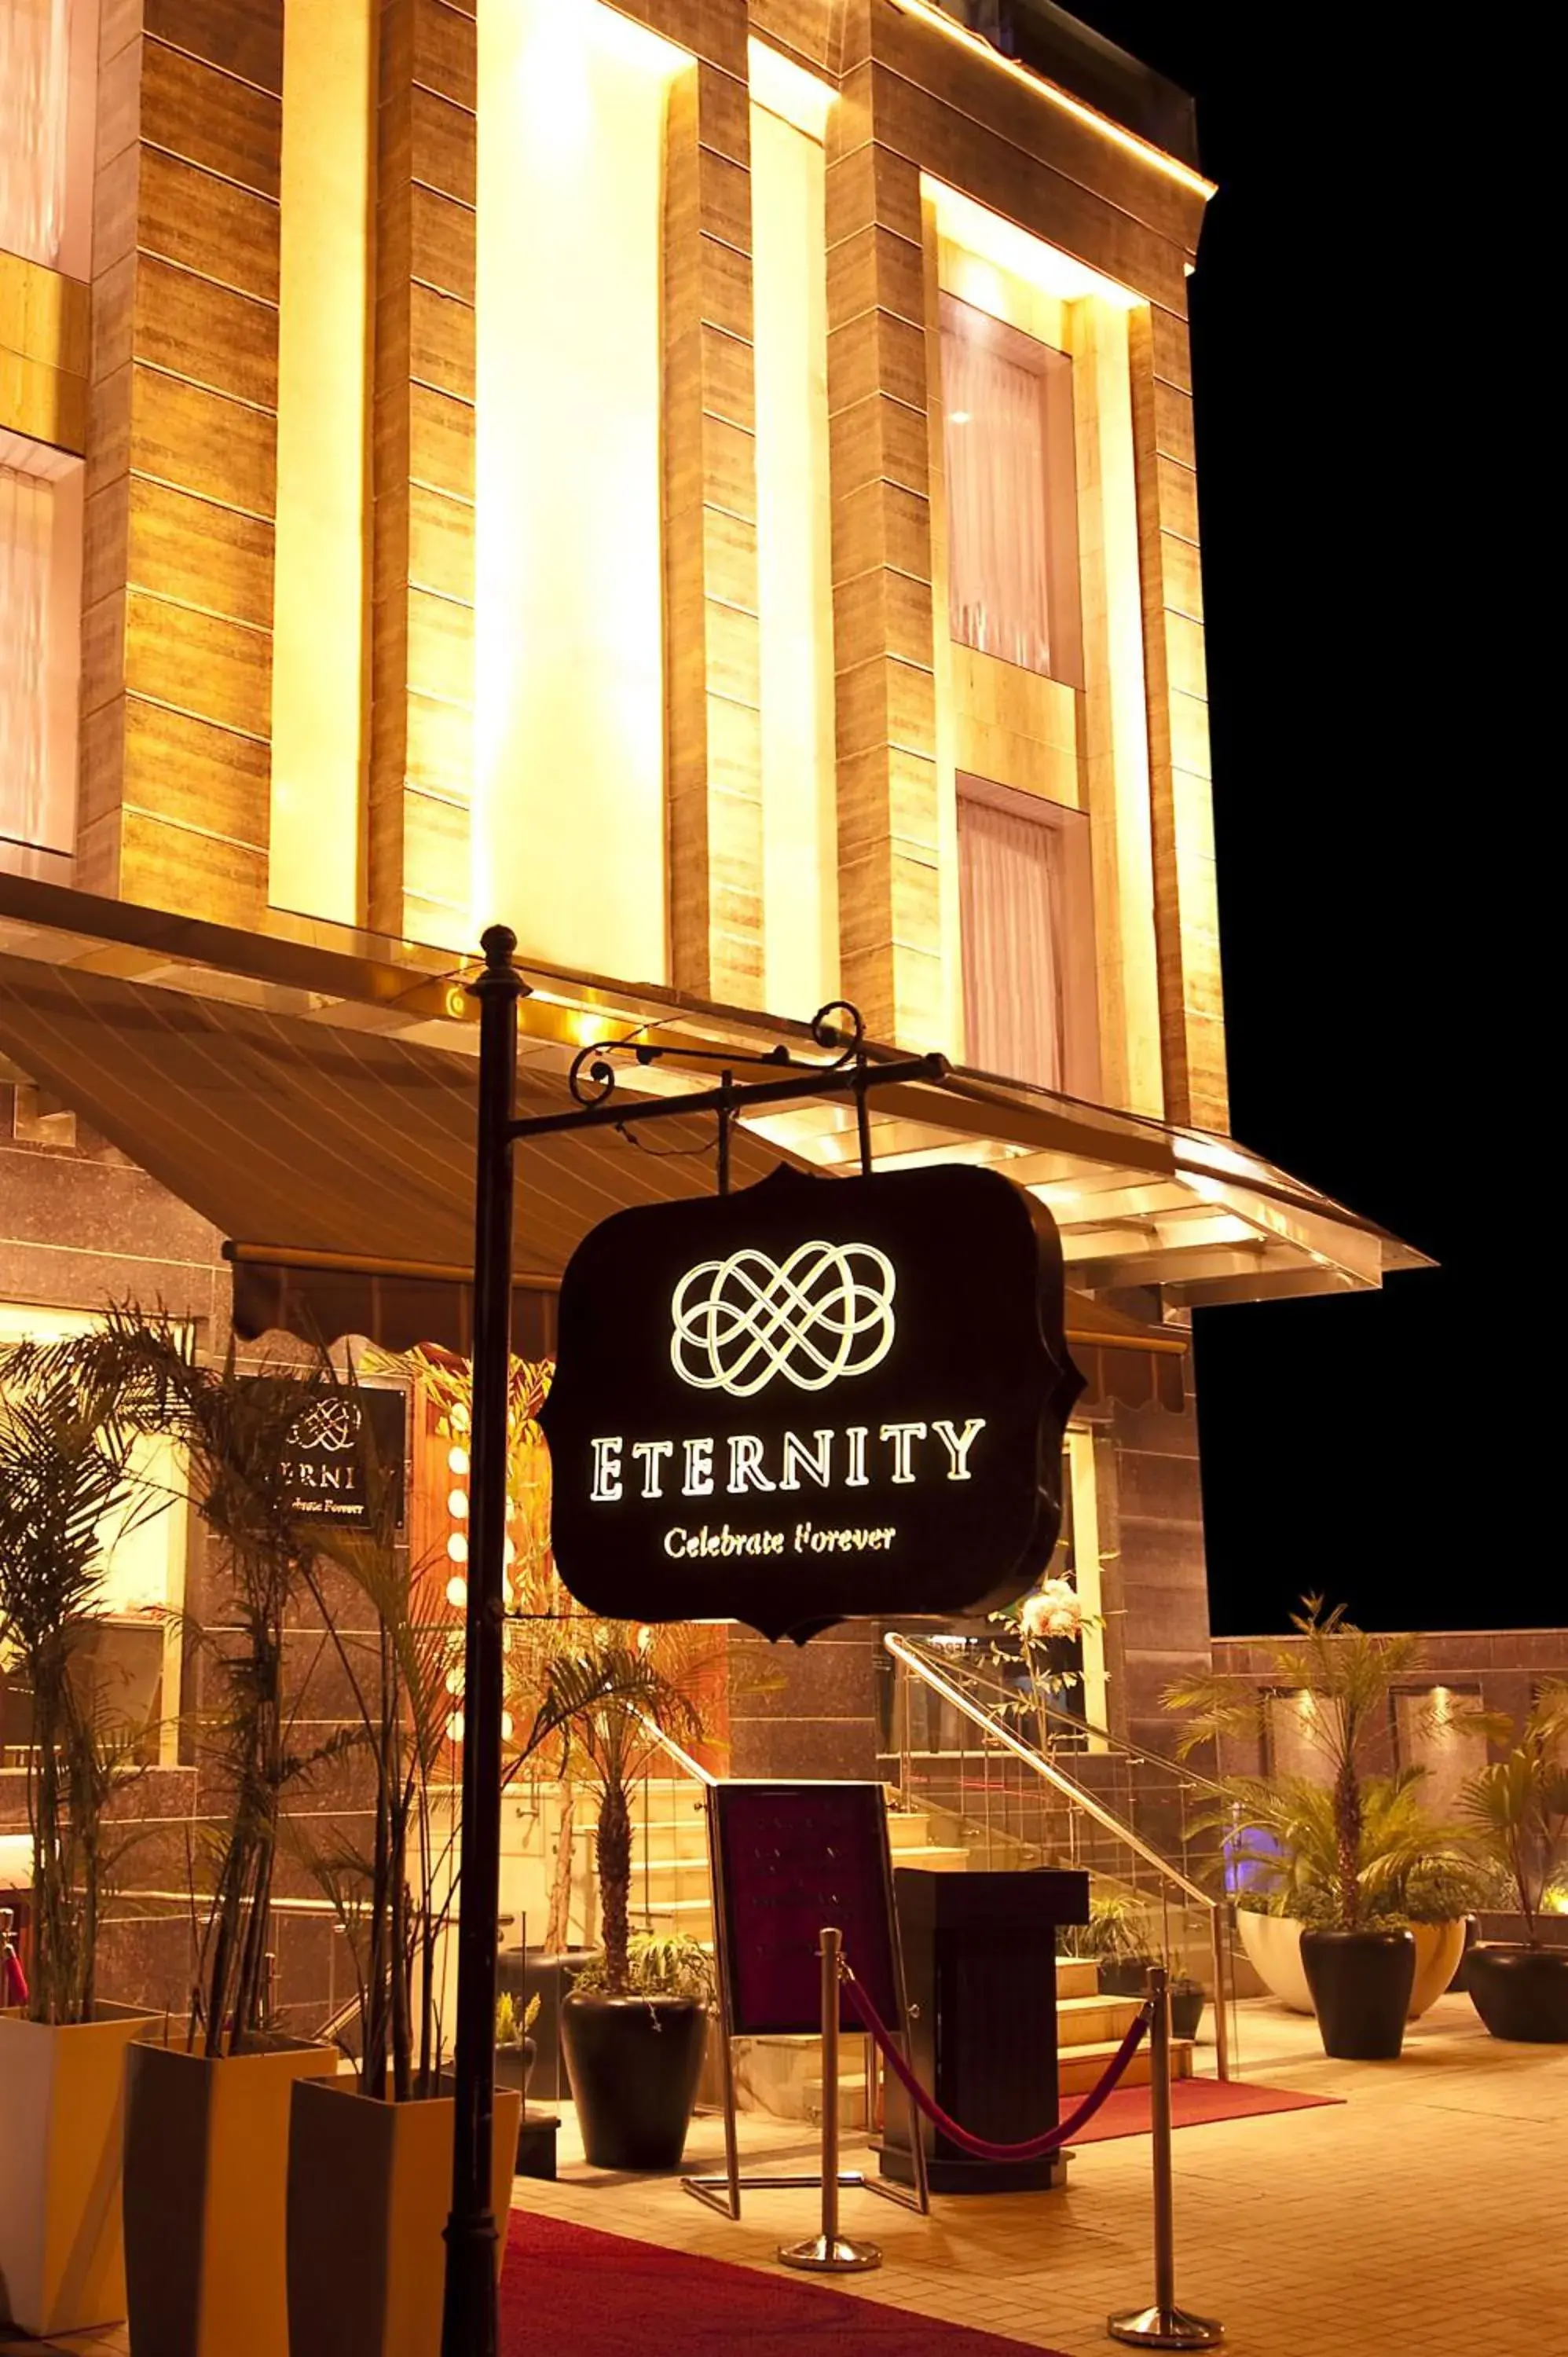 Property logo or sign in Hotel Eternity